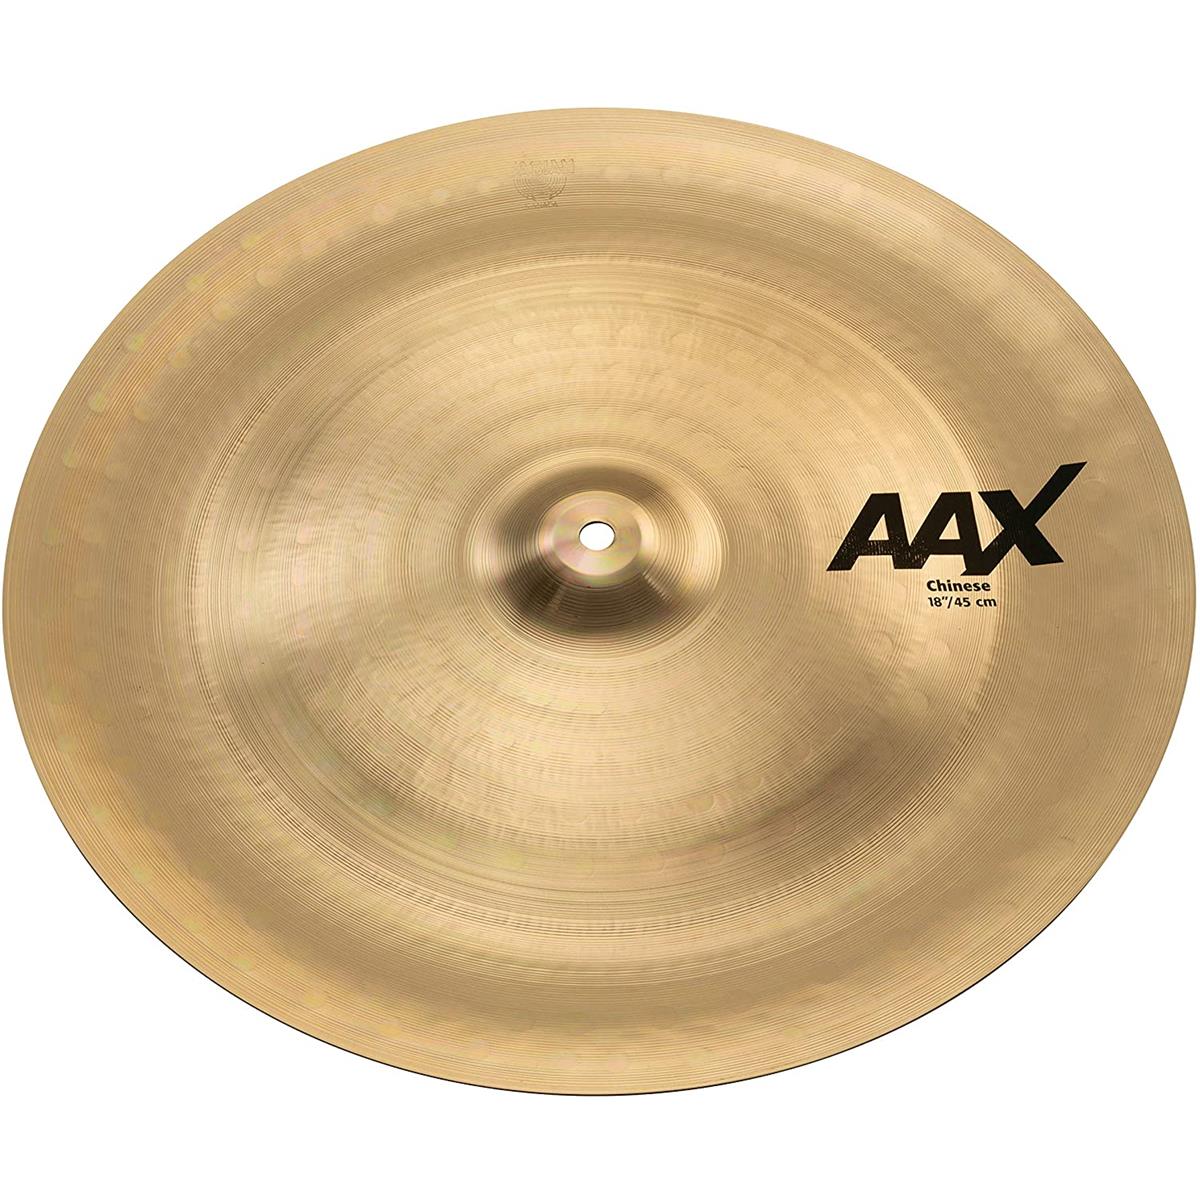 Sabian 18" AAX Chinese Cymbal, Thin, Brilliant Sabian 18" AAX Chinese delivers Modern Bright, biting response that is big, brash and trashy. The Sabian AAX series delivers consistently bright, crisp, clear and cutting responses - AAX is the ultimate Modern Bright sound!